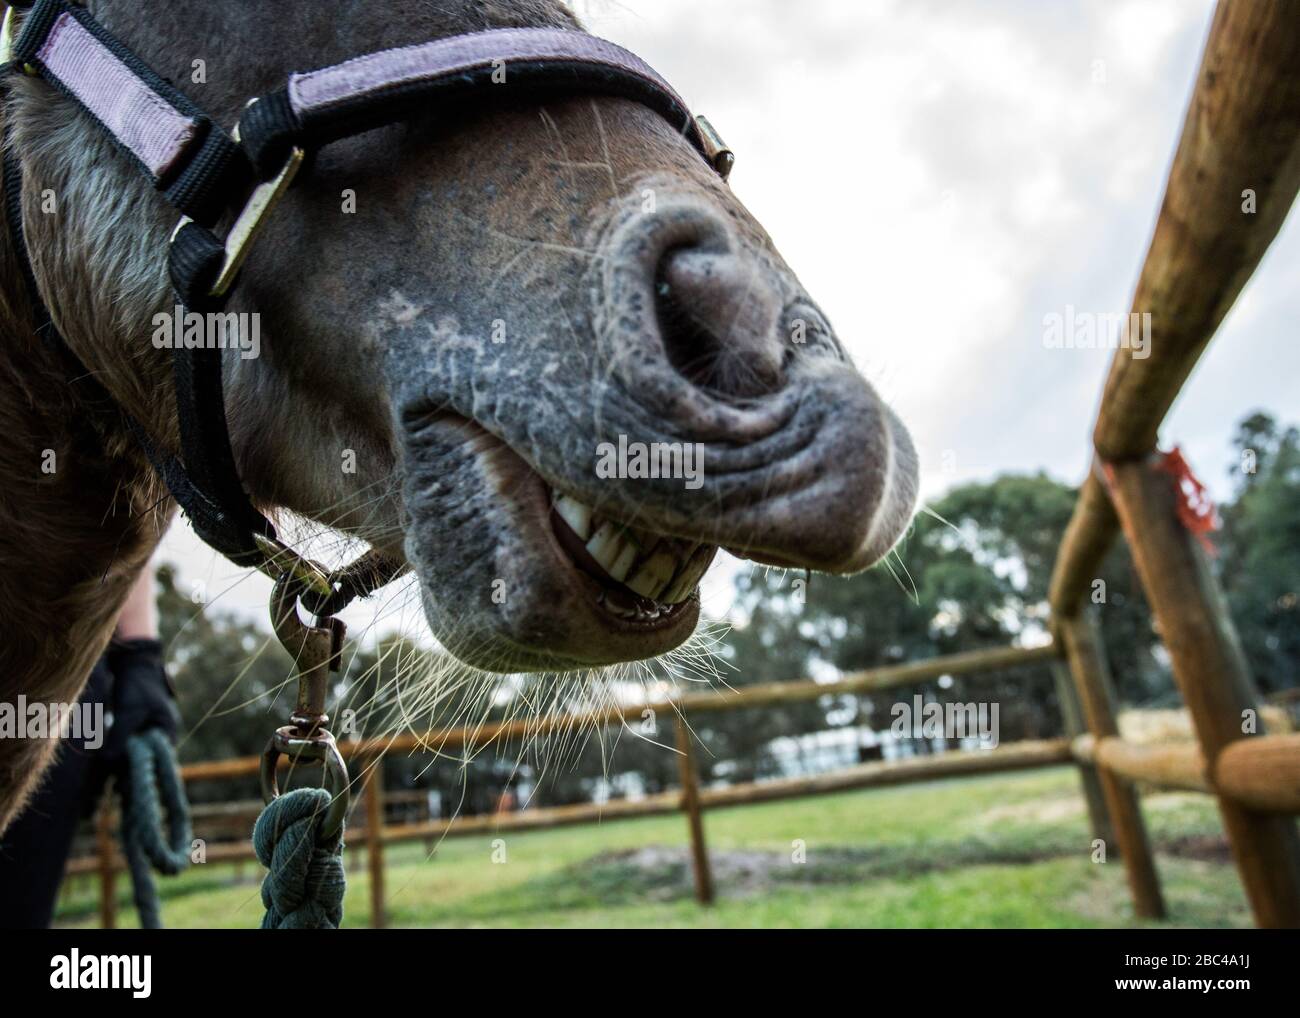 Closeup of a pony wriggling nose and showing teeth Stock Photo